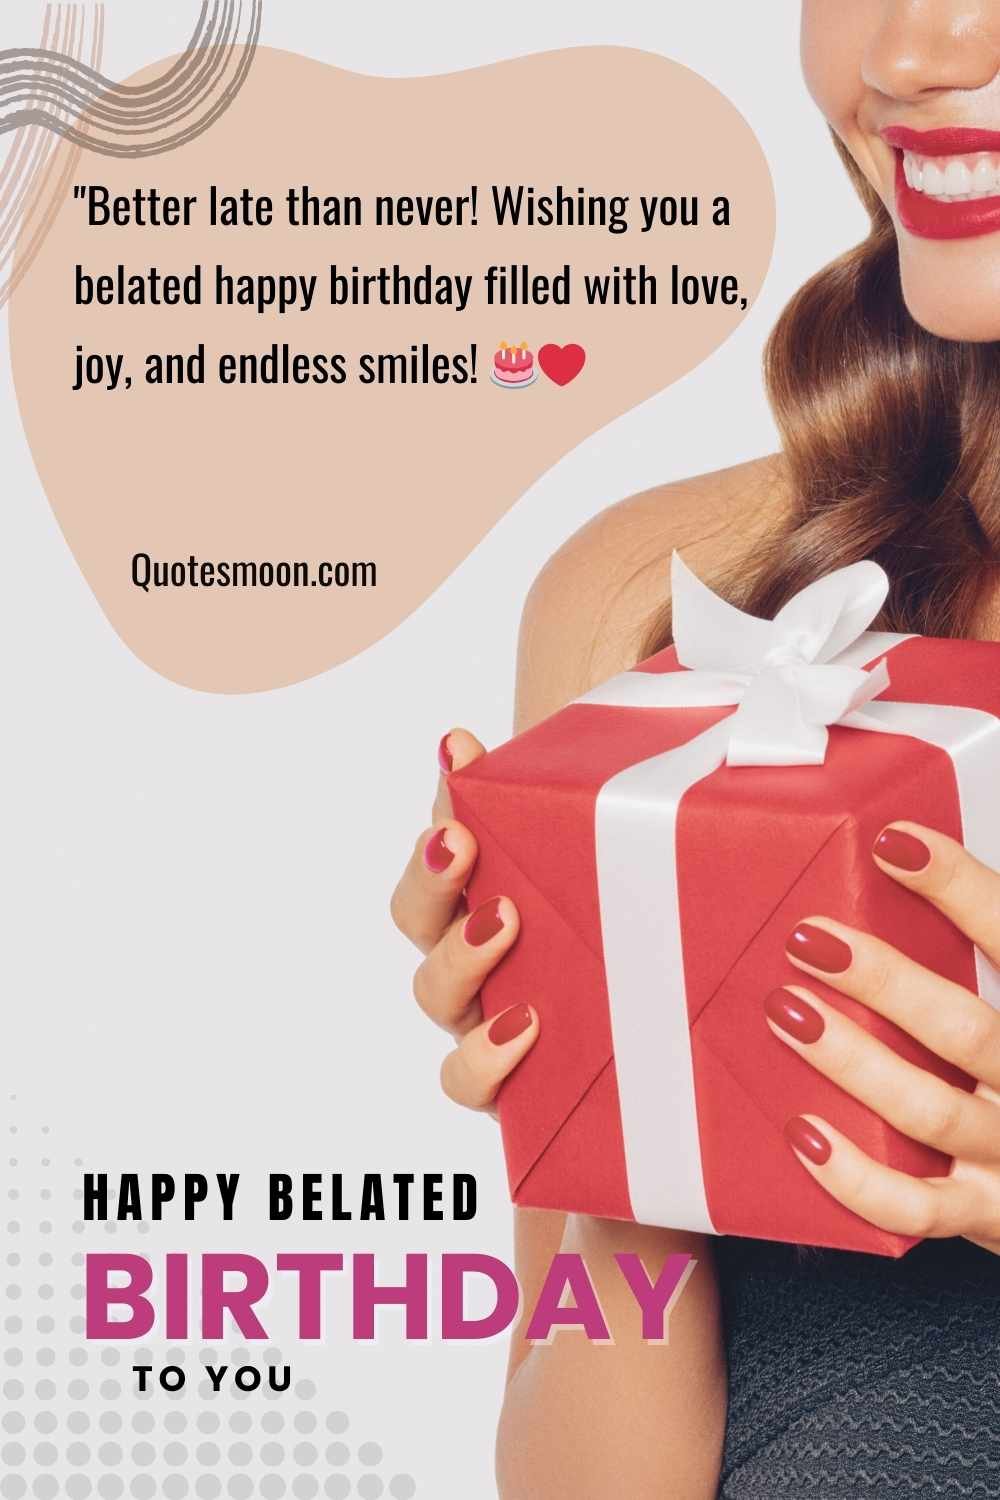 Best Belated Birthday Wishes with quotes image